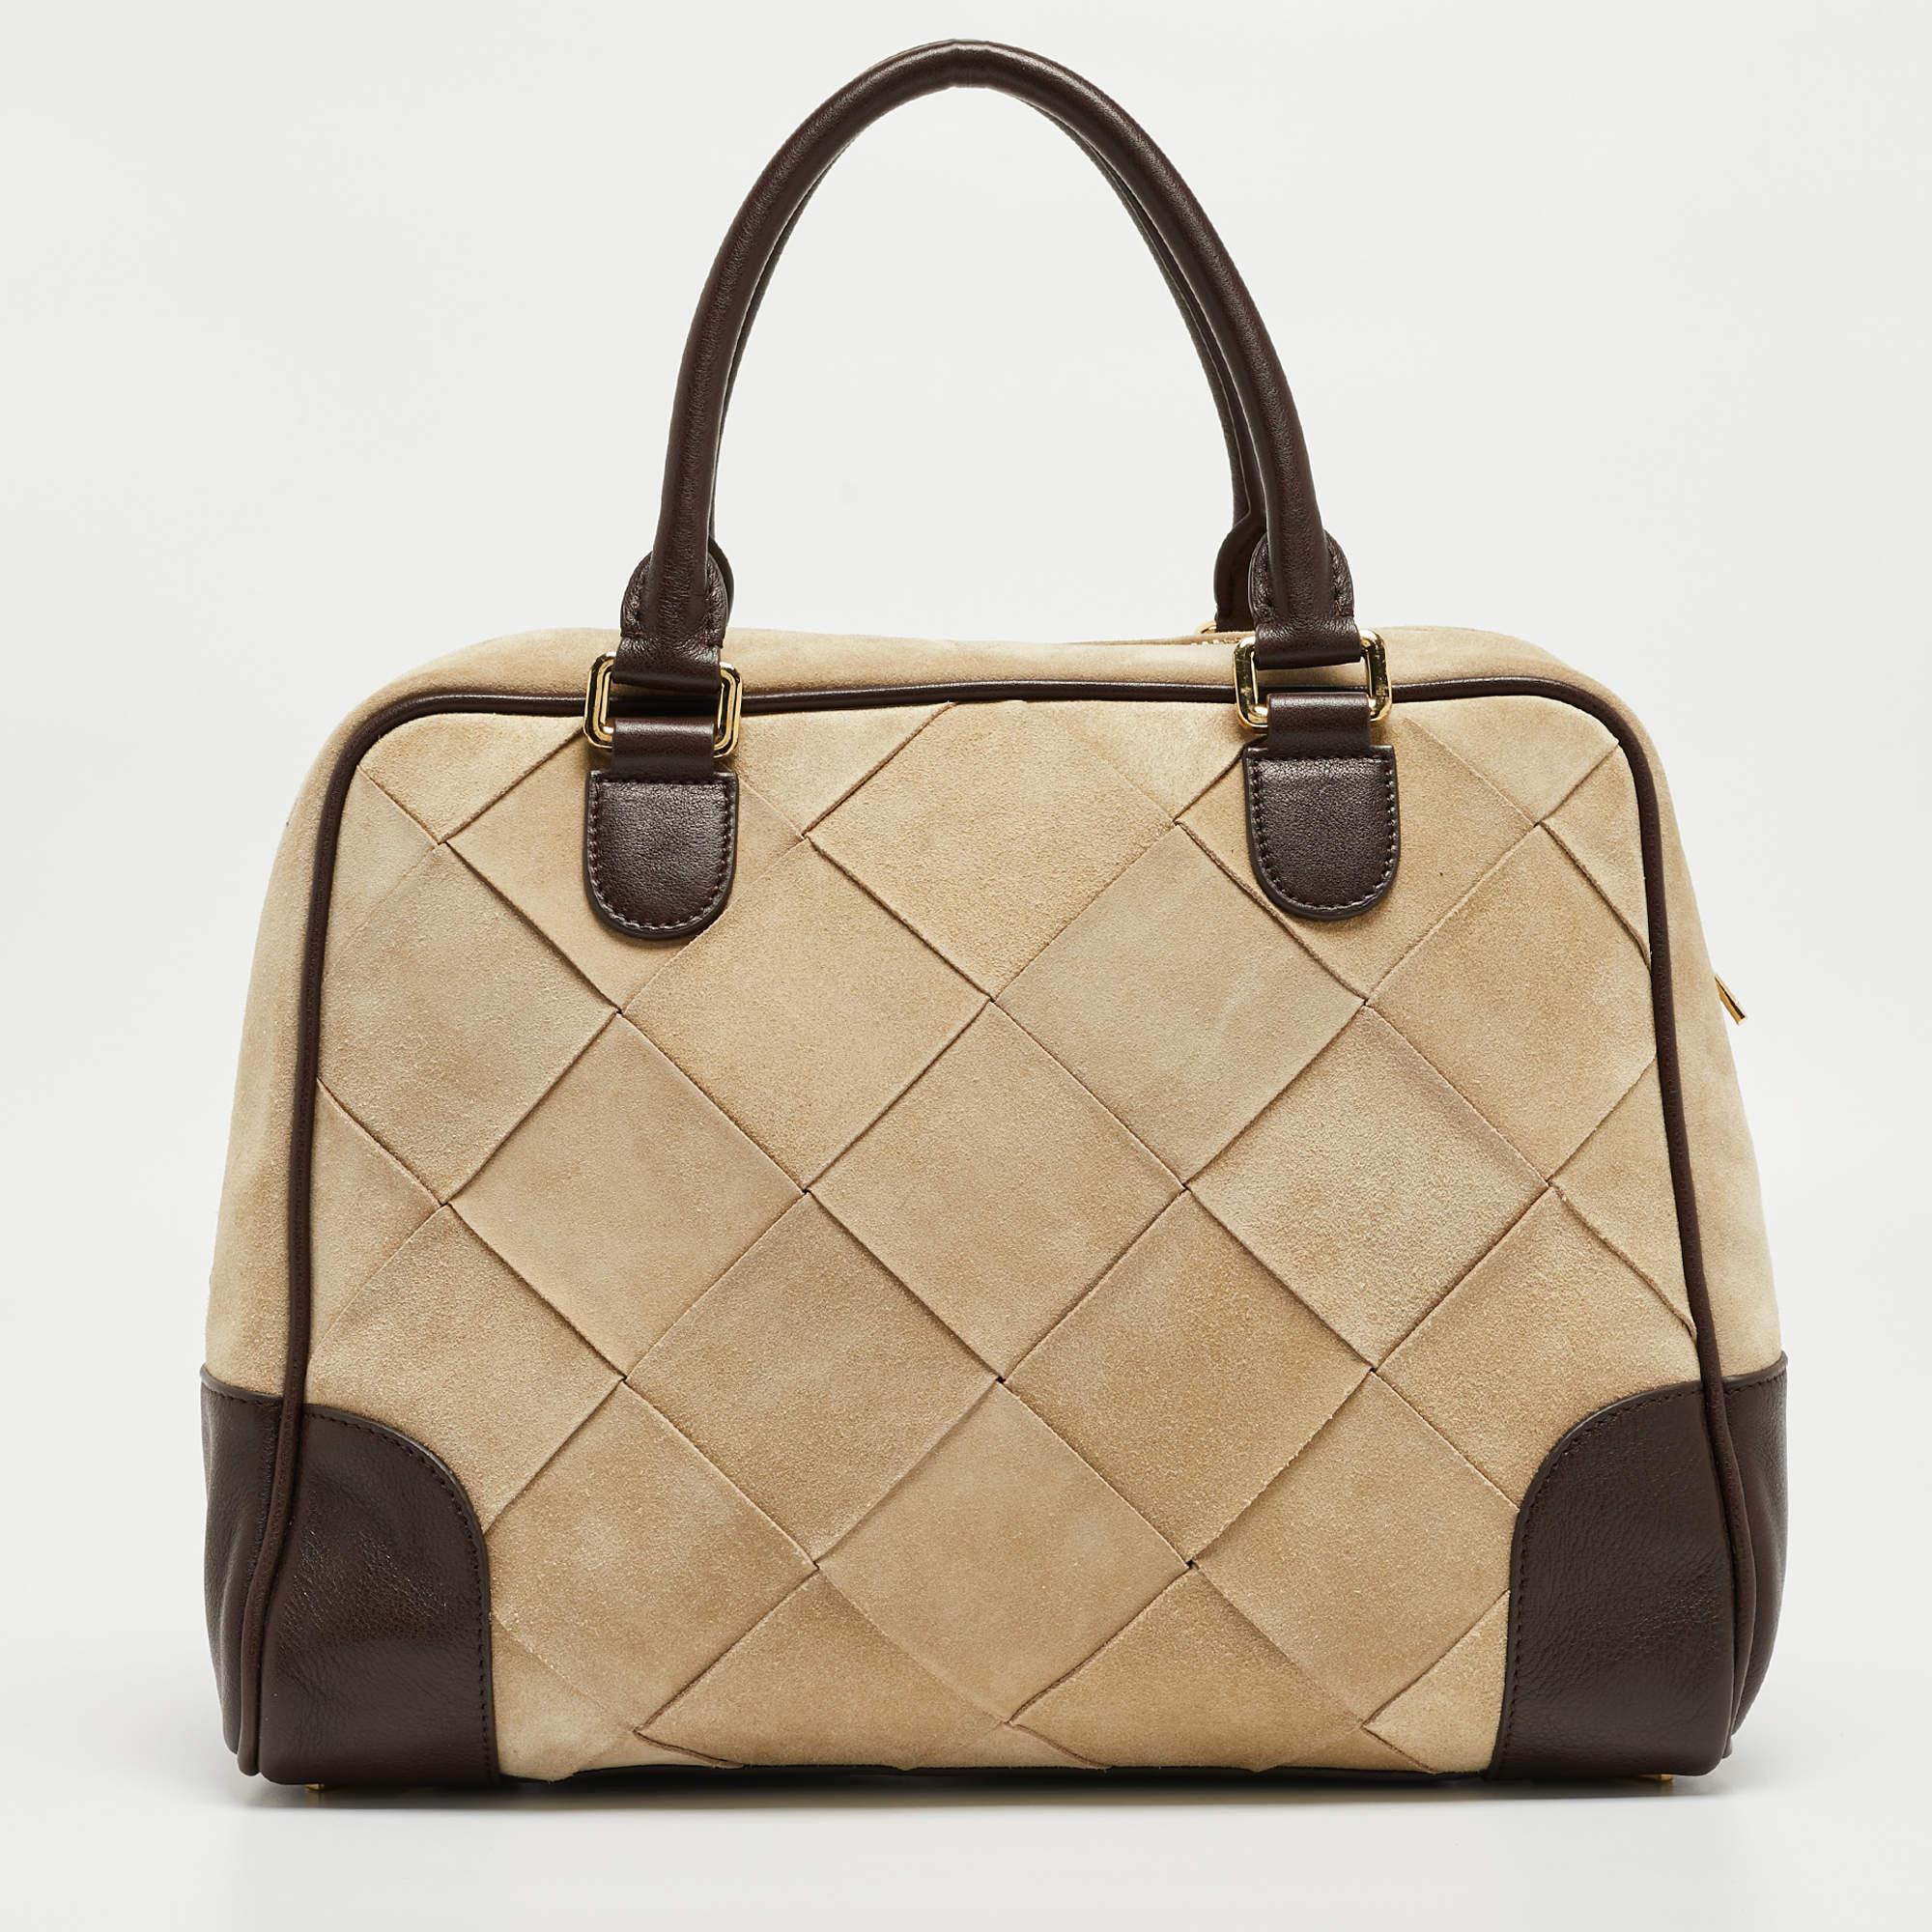 This Loewe Amazona 36 bag is a result of blending high crafting skills with a practical design. It arrives with a durable exterior completed by luxe detailing. It is an accessory that you can count on.

Includes: Original Dustbag

